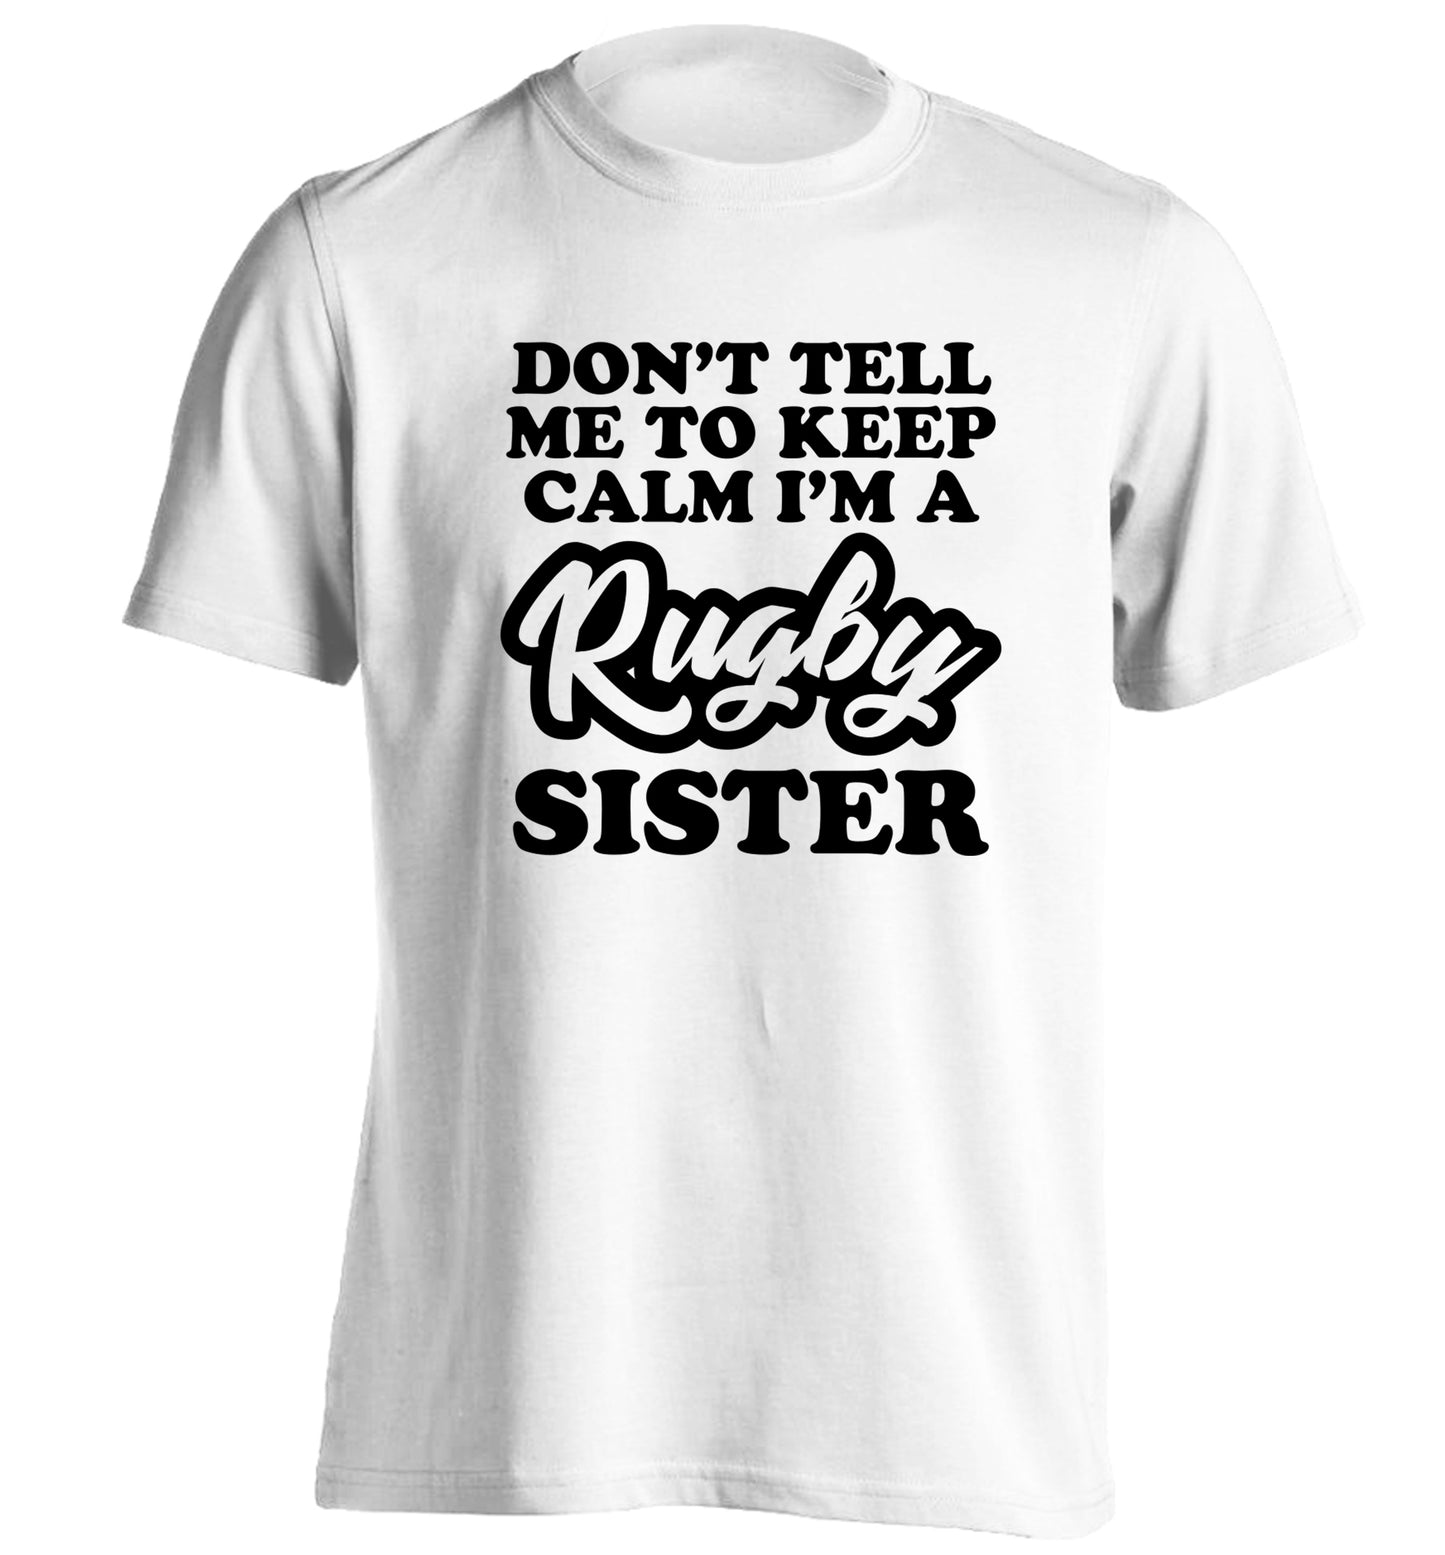 Don't tell me keep calm I'm a rugby sister adults unisex white Tshirt 2XL